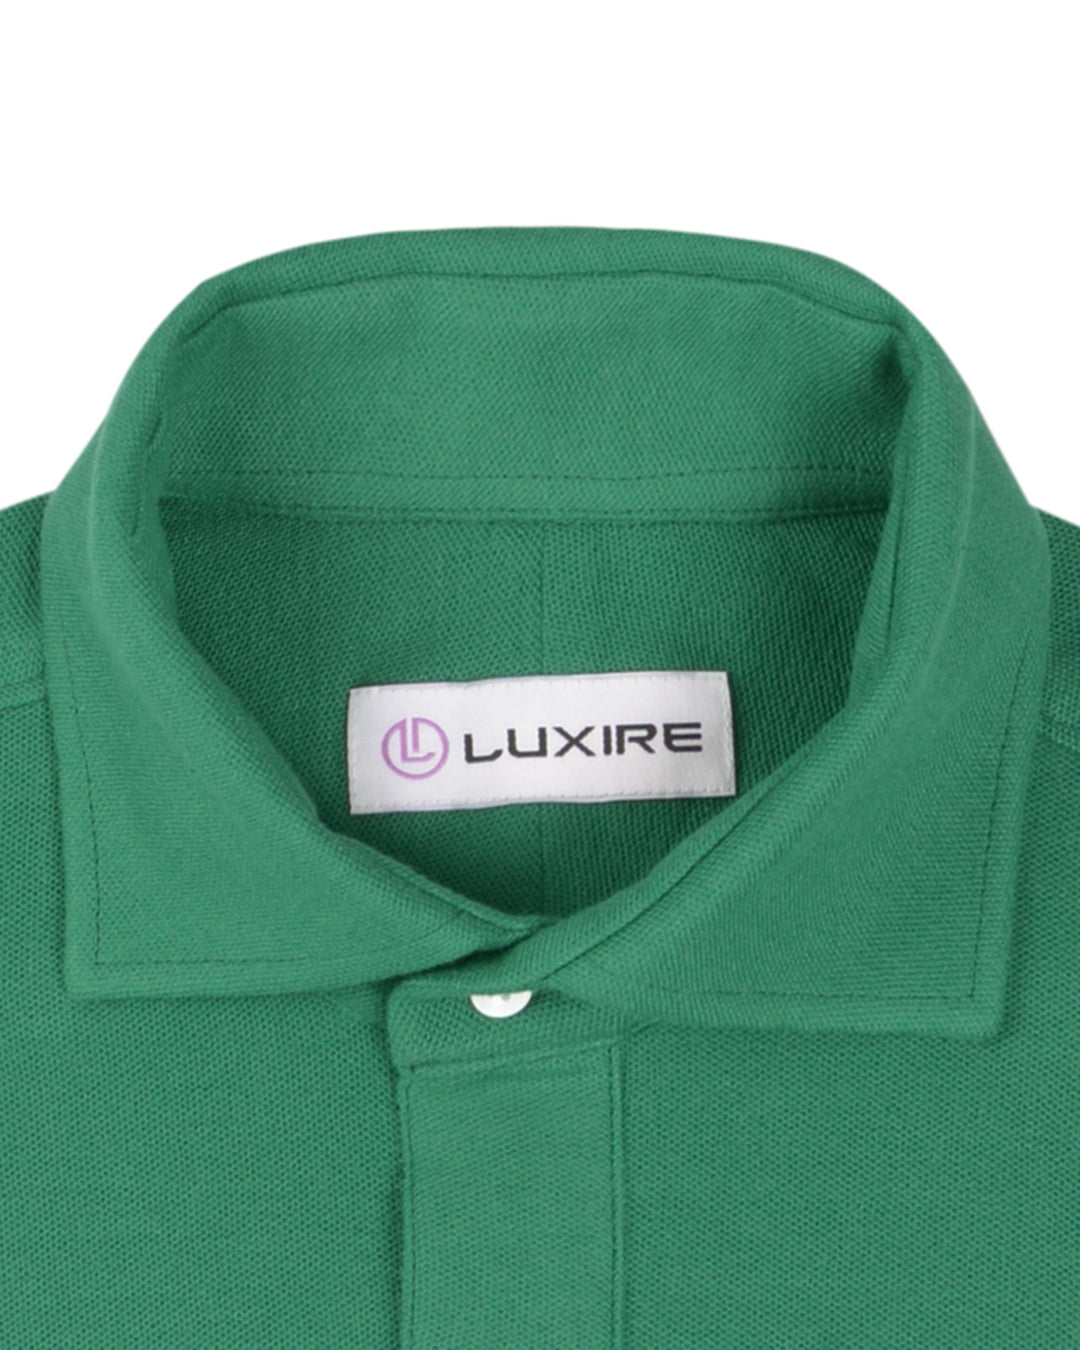 Collar of the custom oxford polo shirt for men by Luxire in emerald green